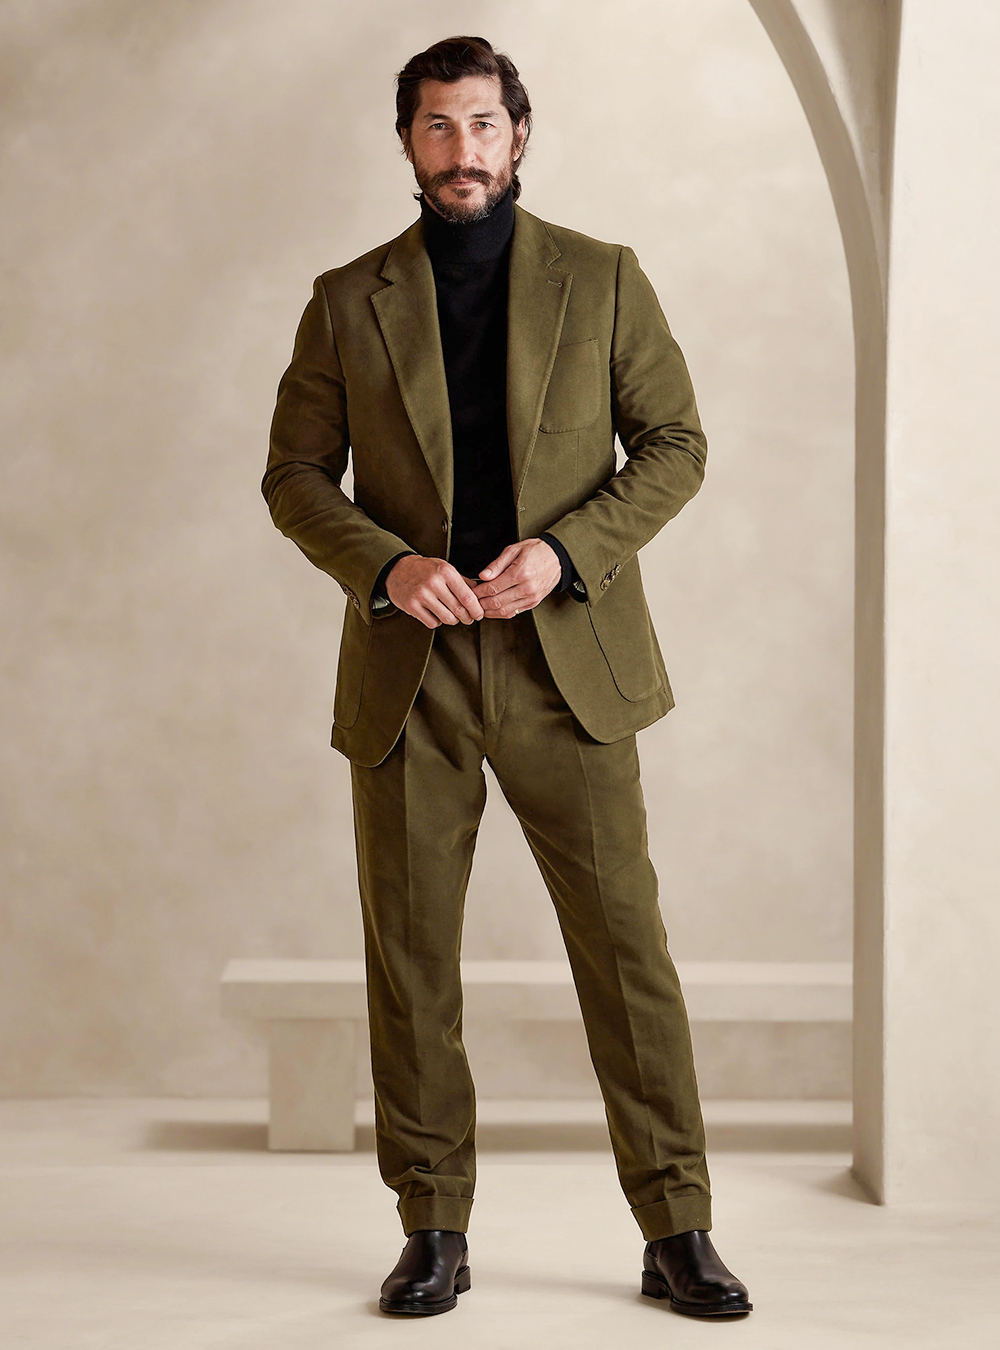 Green suit, black turtleneck and black leather Chelsea boots